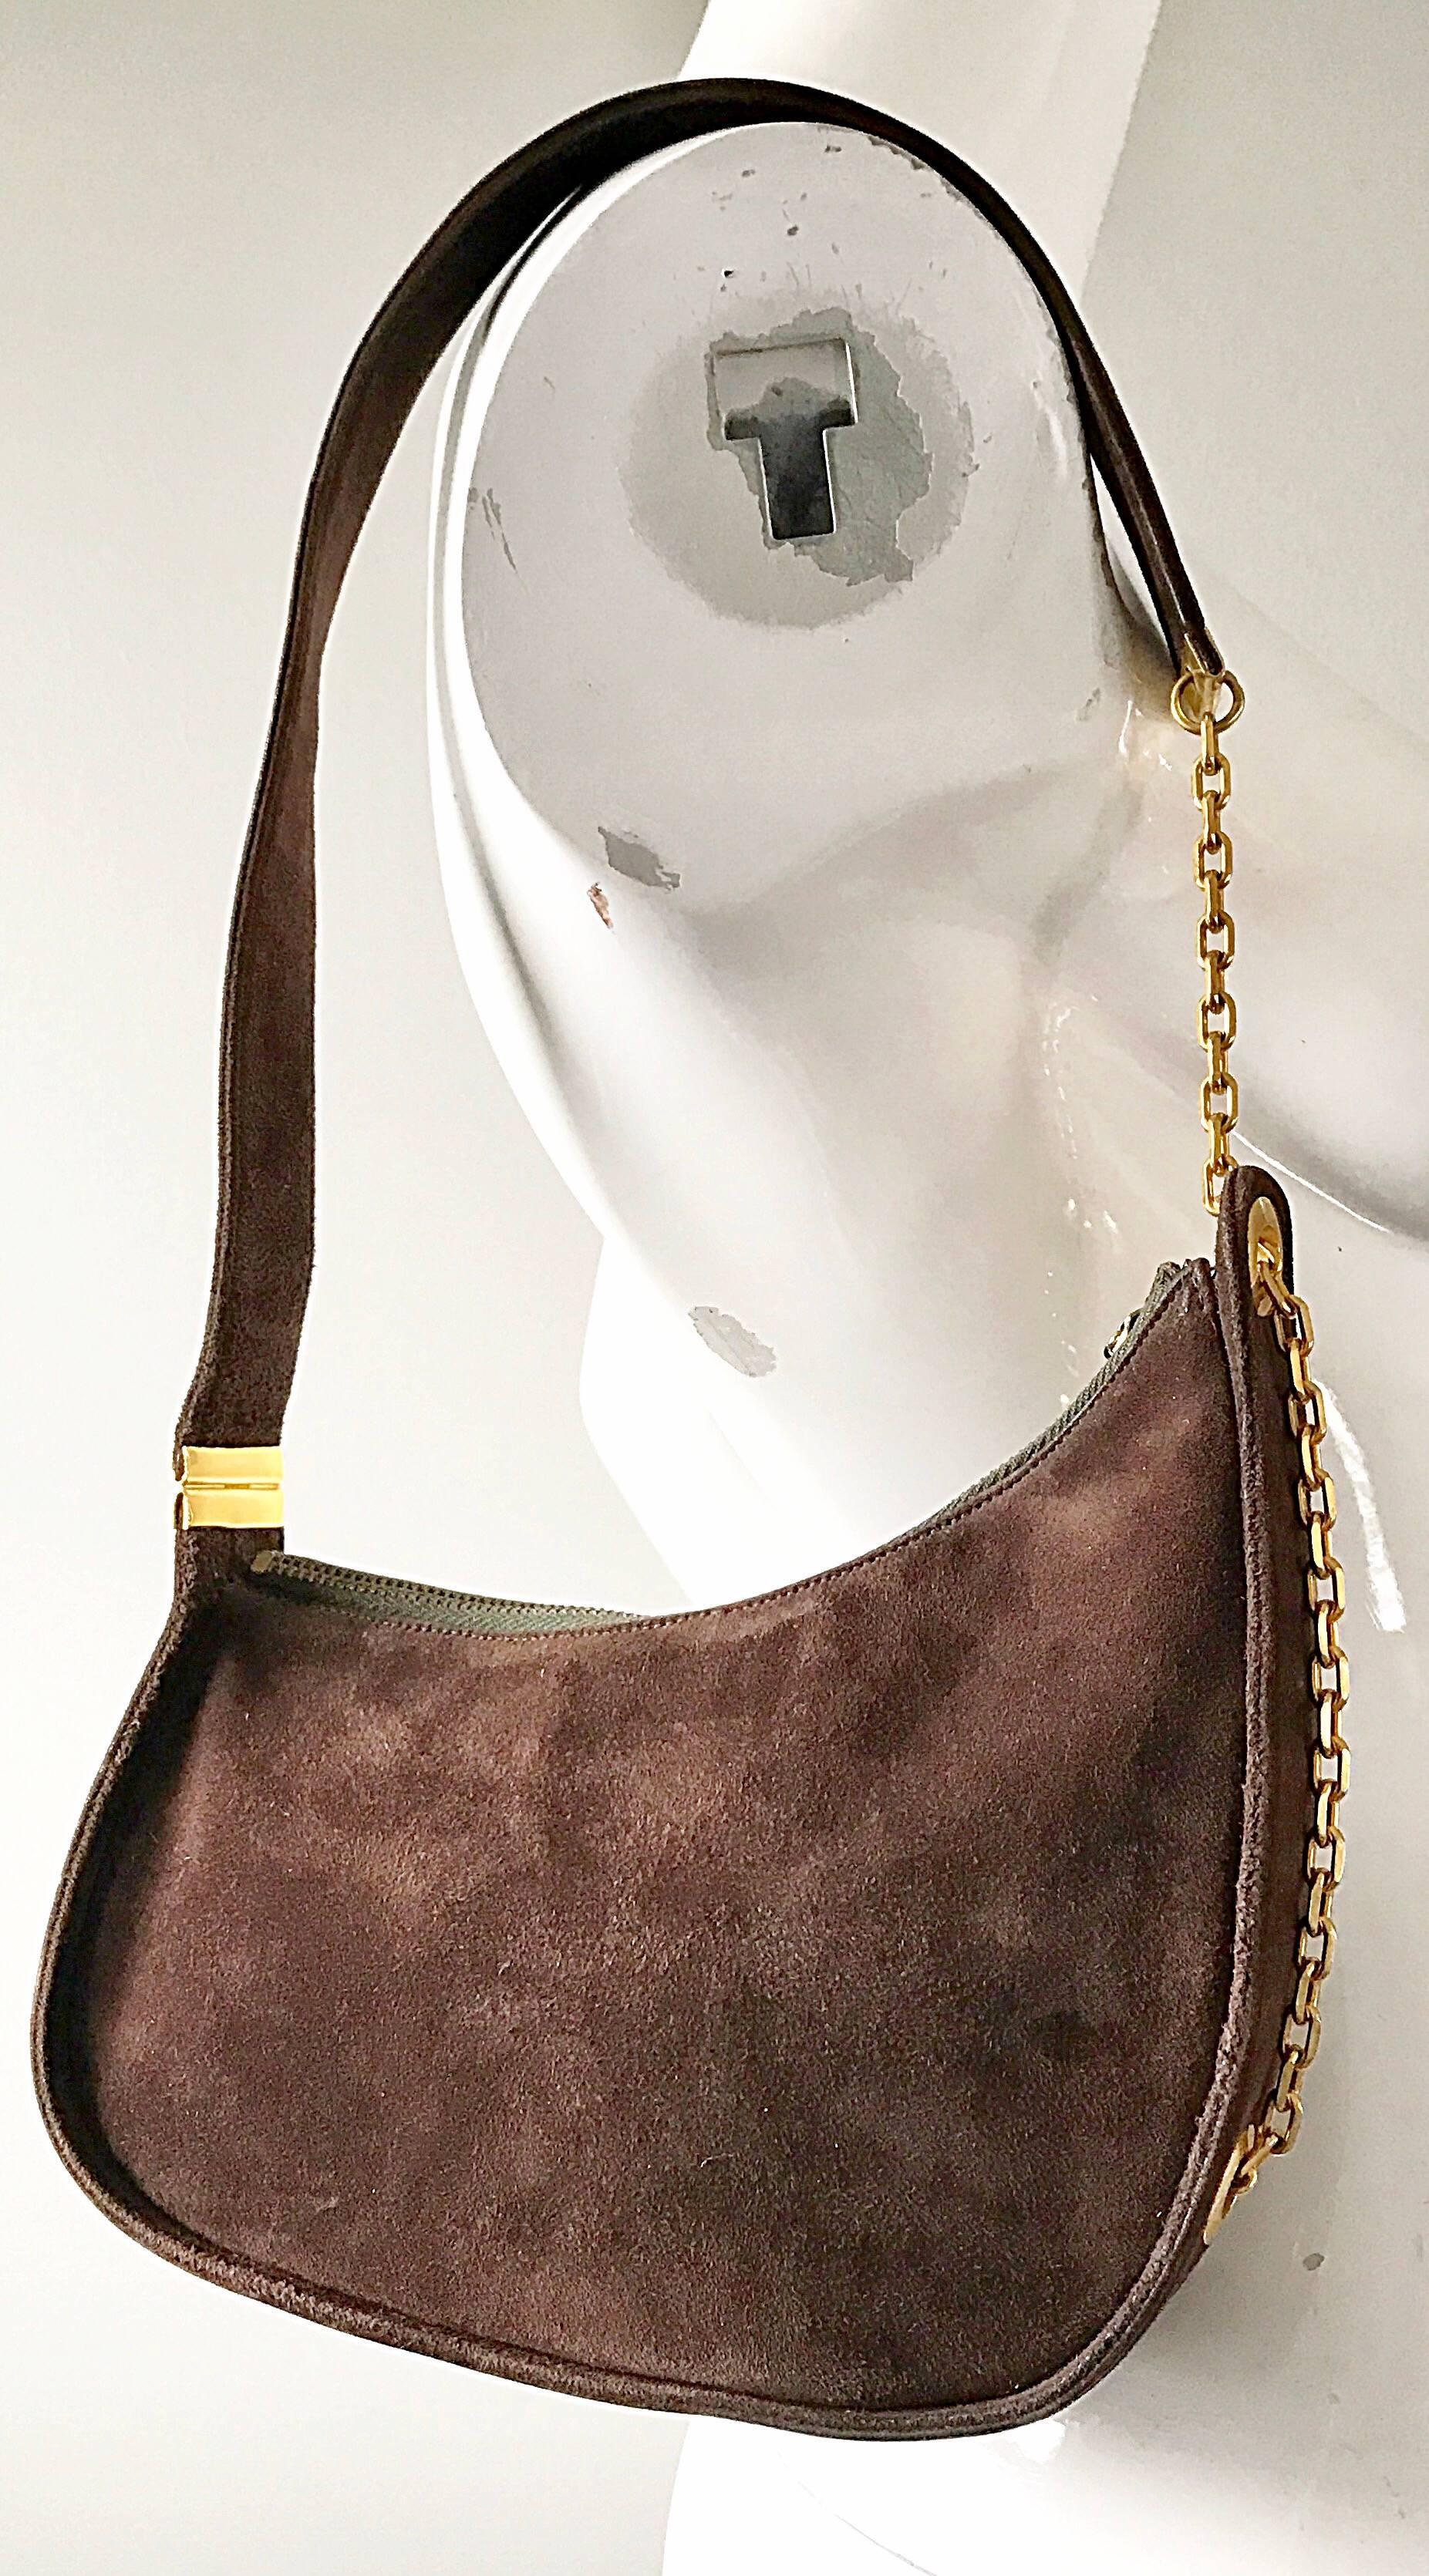 Amazing and rare 50s vintage KORET bag! Avant Garde asymmetrical shape that easily sits on the shoulder. Gold chain detail adds a little something extra. Lined in leather, and features a single zipped compartment inside. Zipper top for security. The